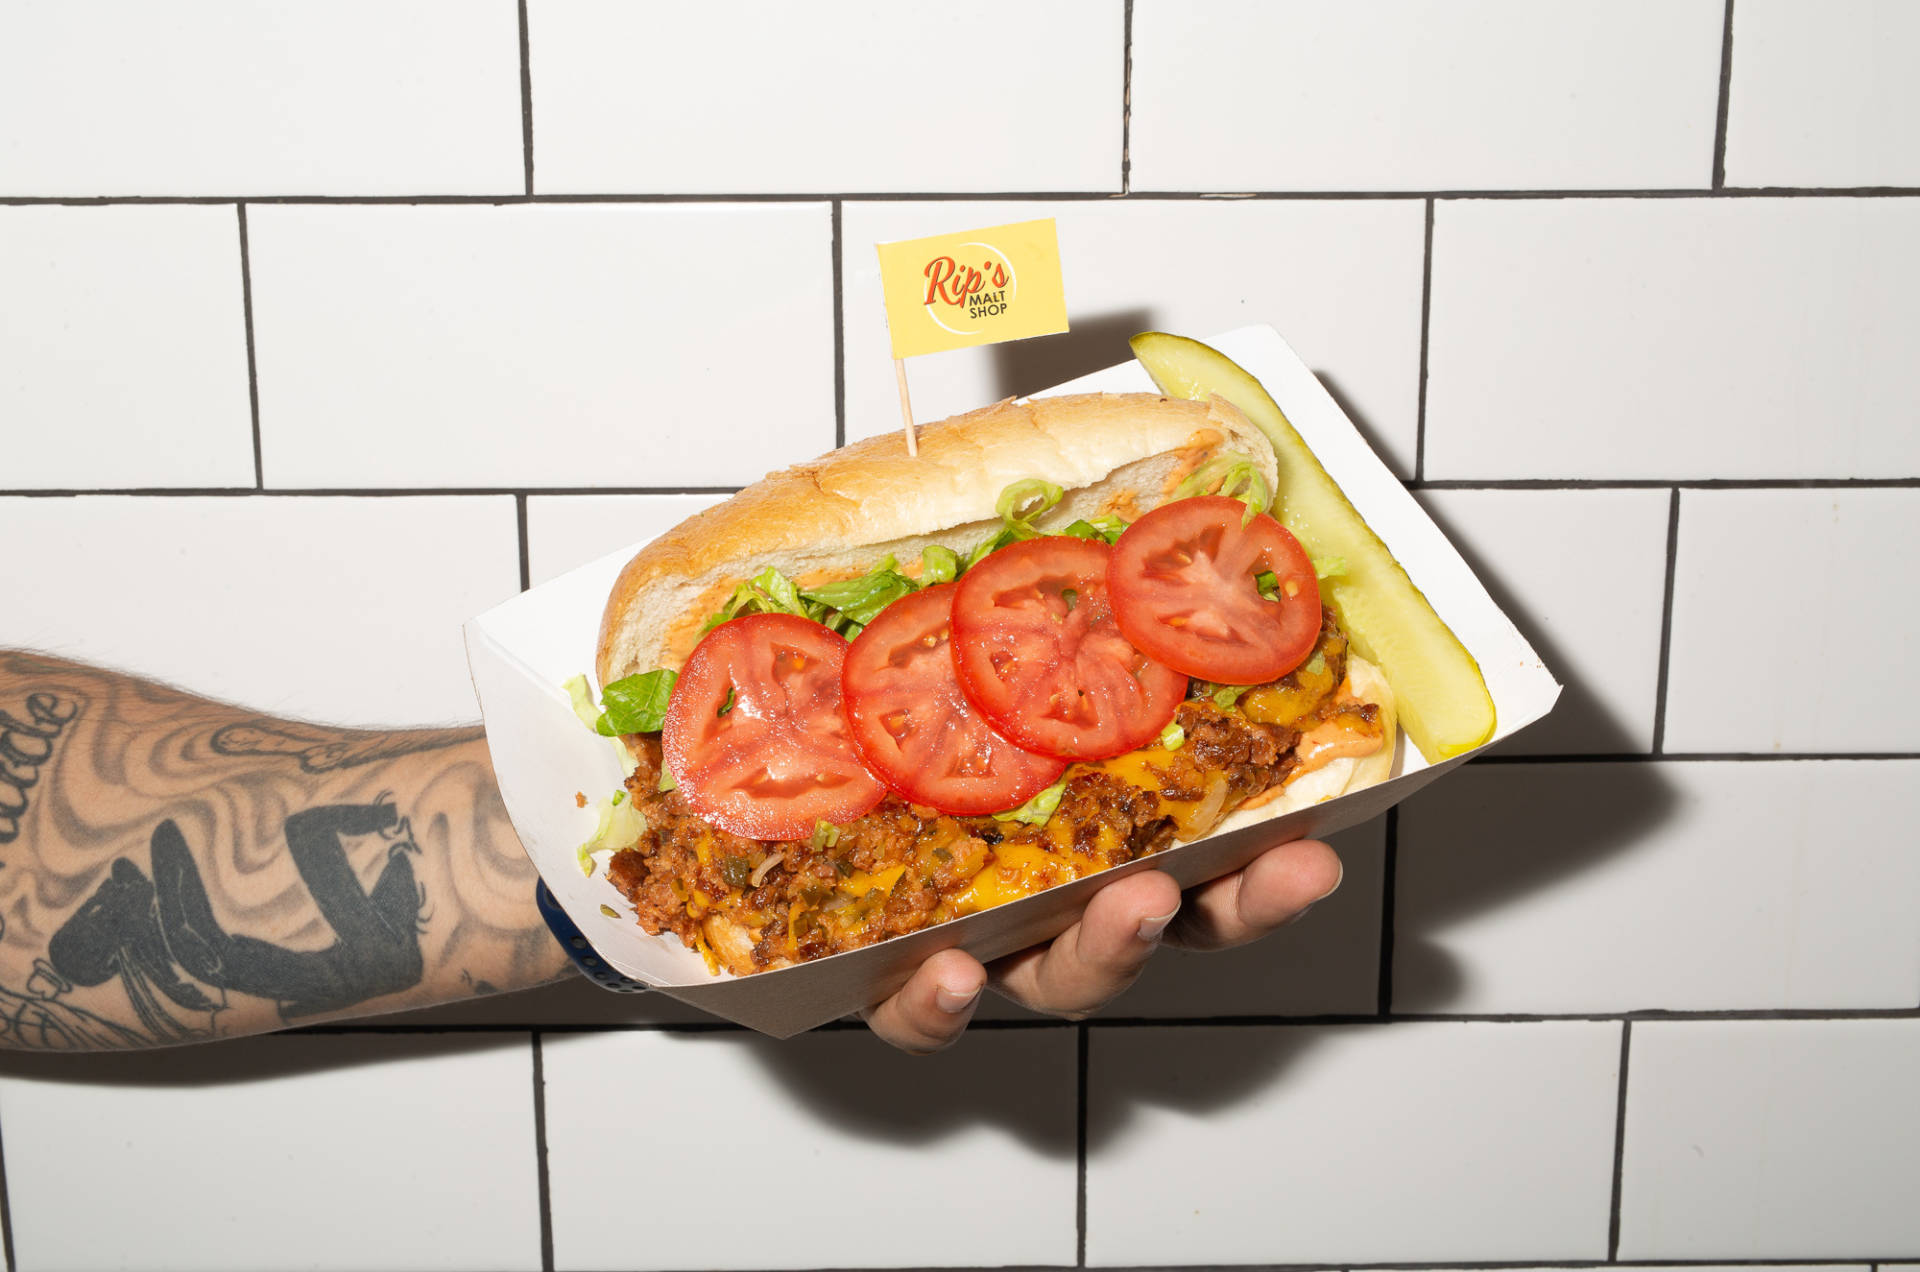 The vegan chopped cheese sandwich is a popular item at Rip's. Instead of ground beef, it's made with diced a Beyond Meat burger and dairy-free Daiya cheese.